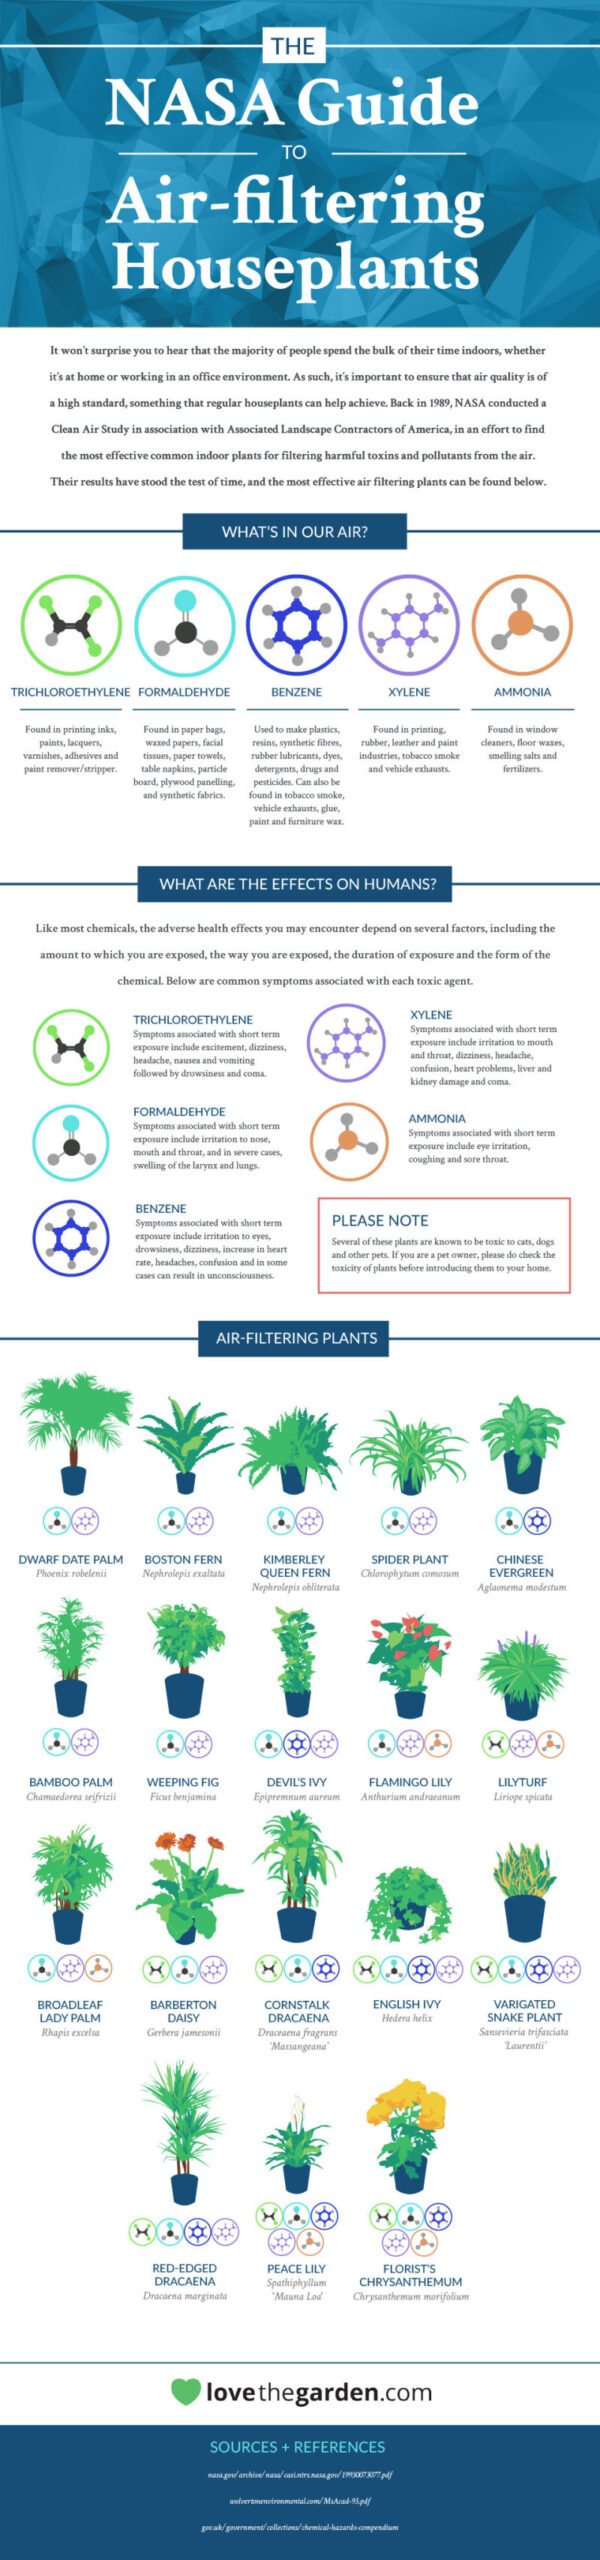 Best Air-Cleaning Plants According to NASA